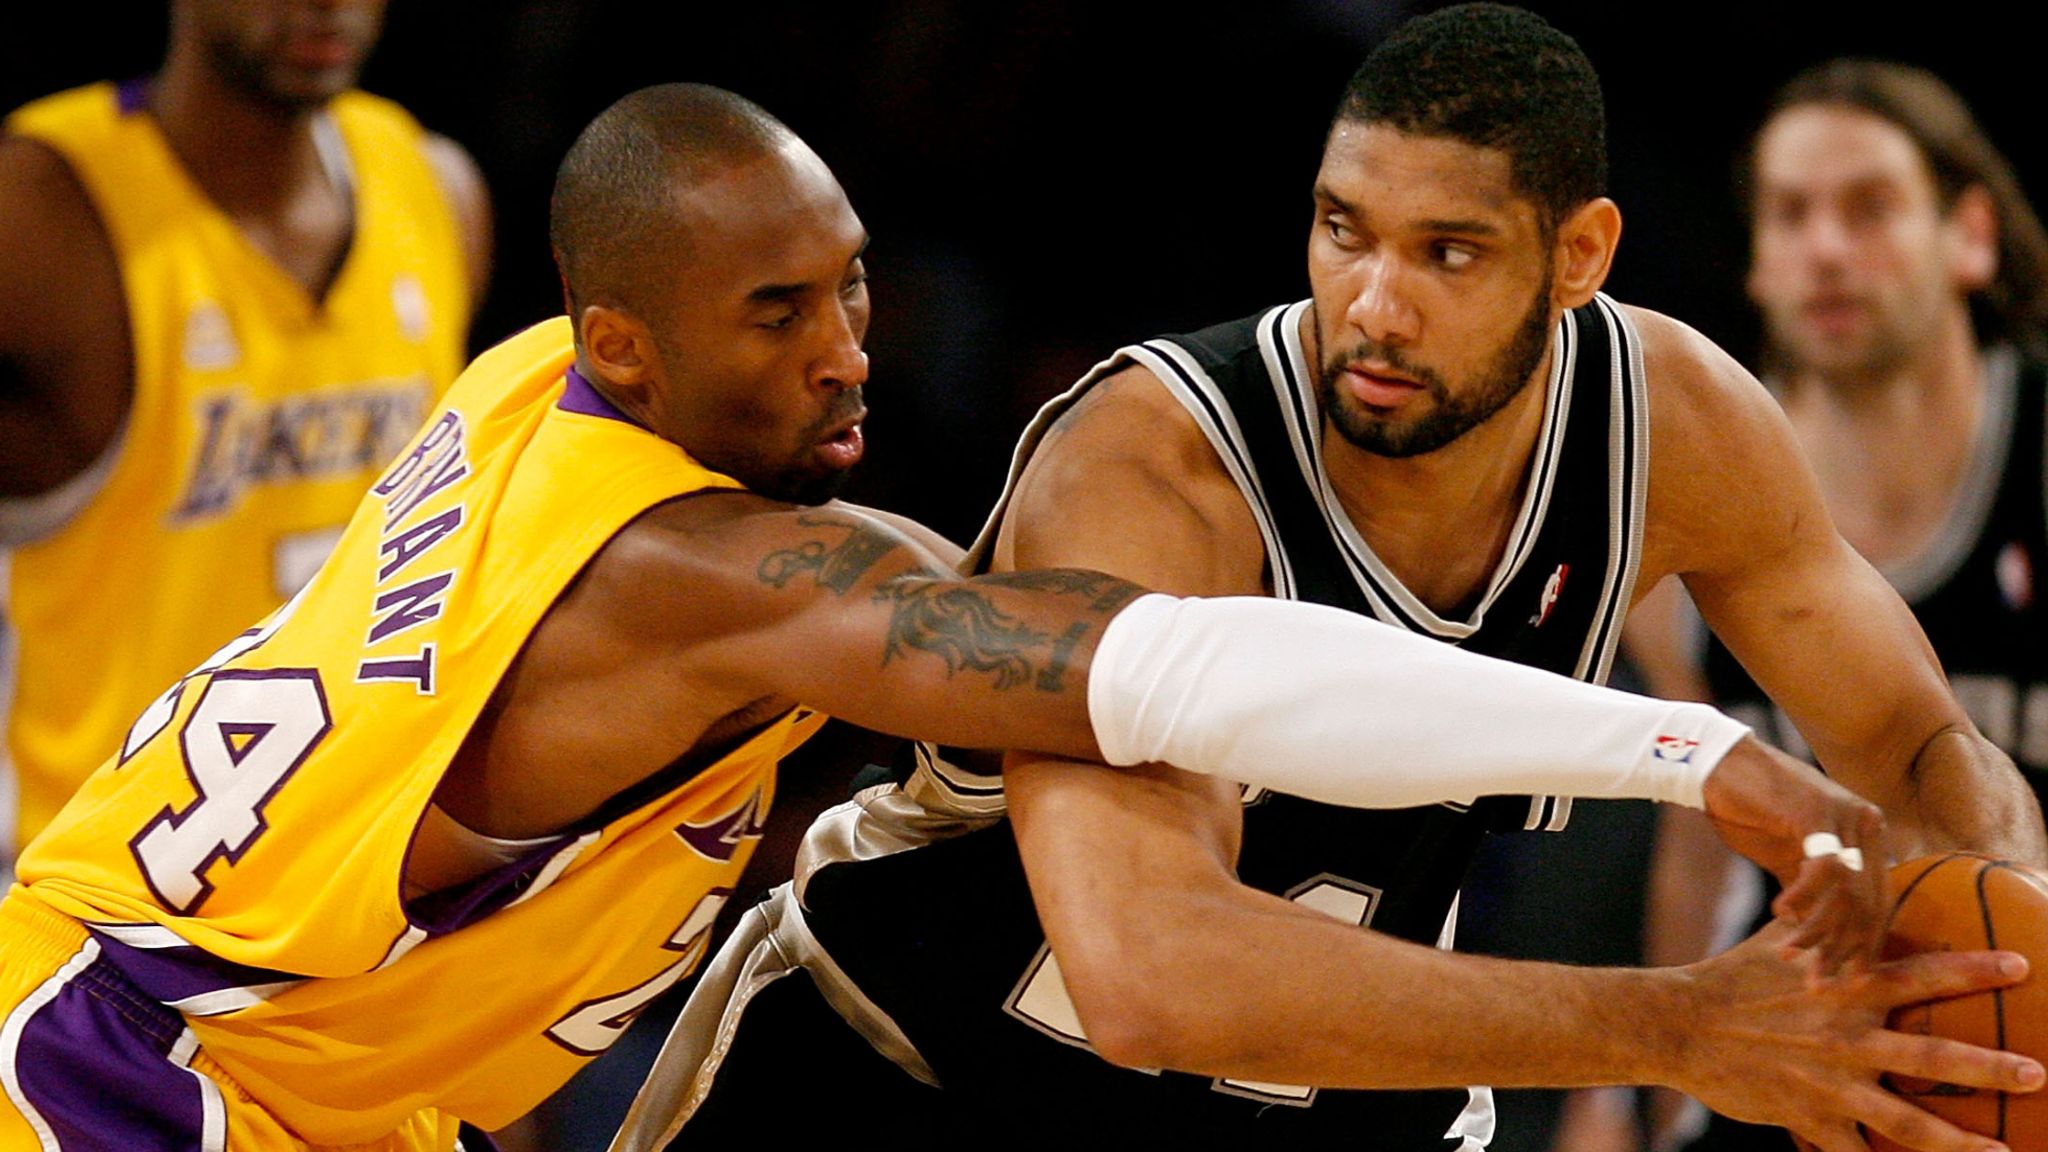 Clash of Champions: Could 2014 Spurs have beaten 1998 Chicago Bulls?